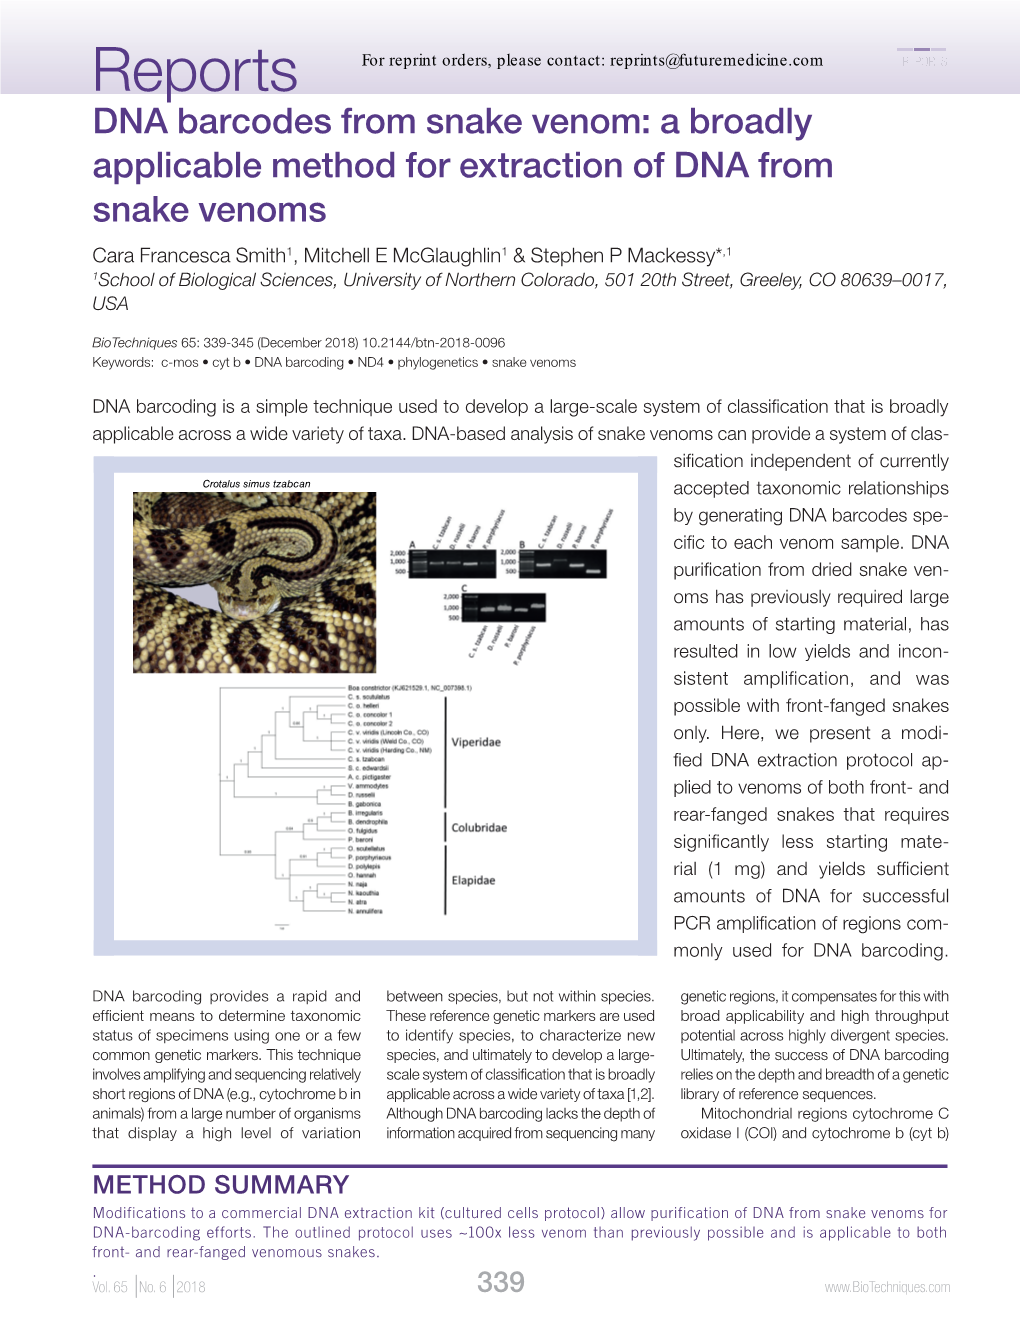 A Broadly Applicable Method for Extraction of DNA from Snake Venoms